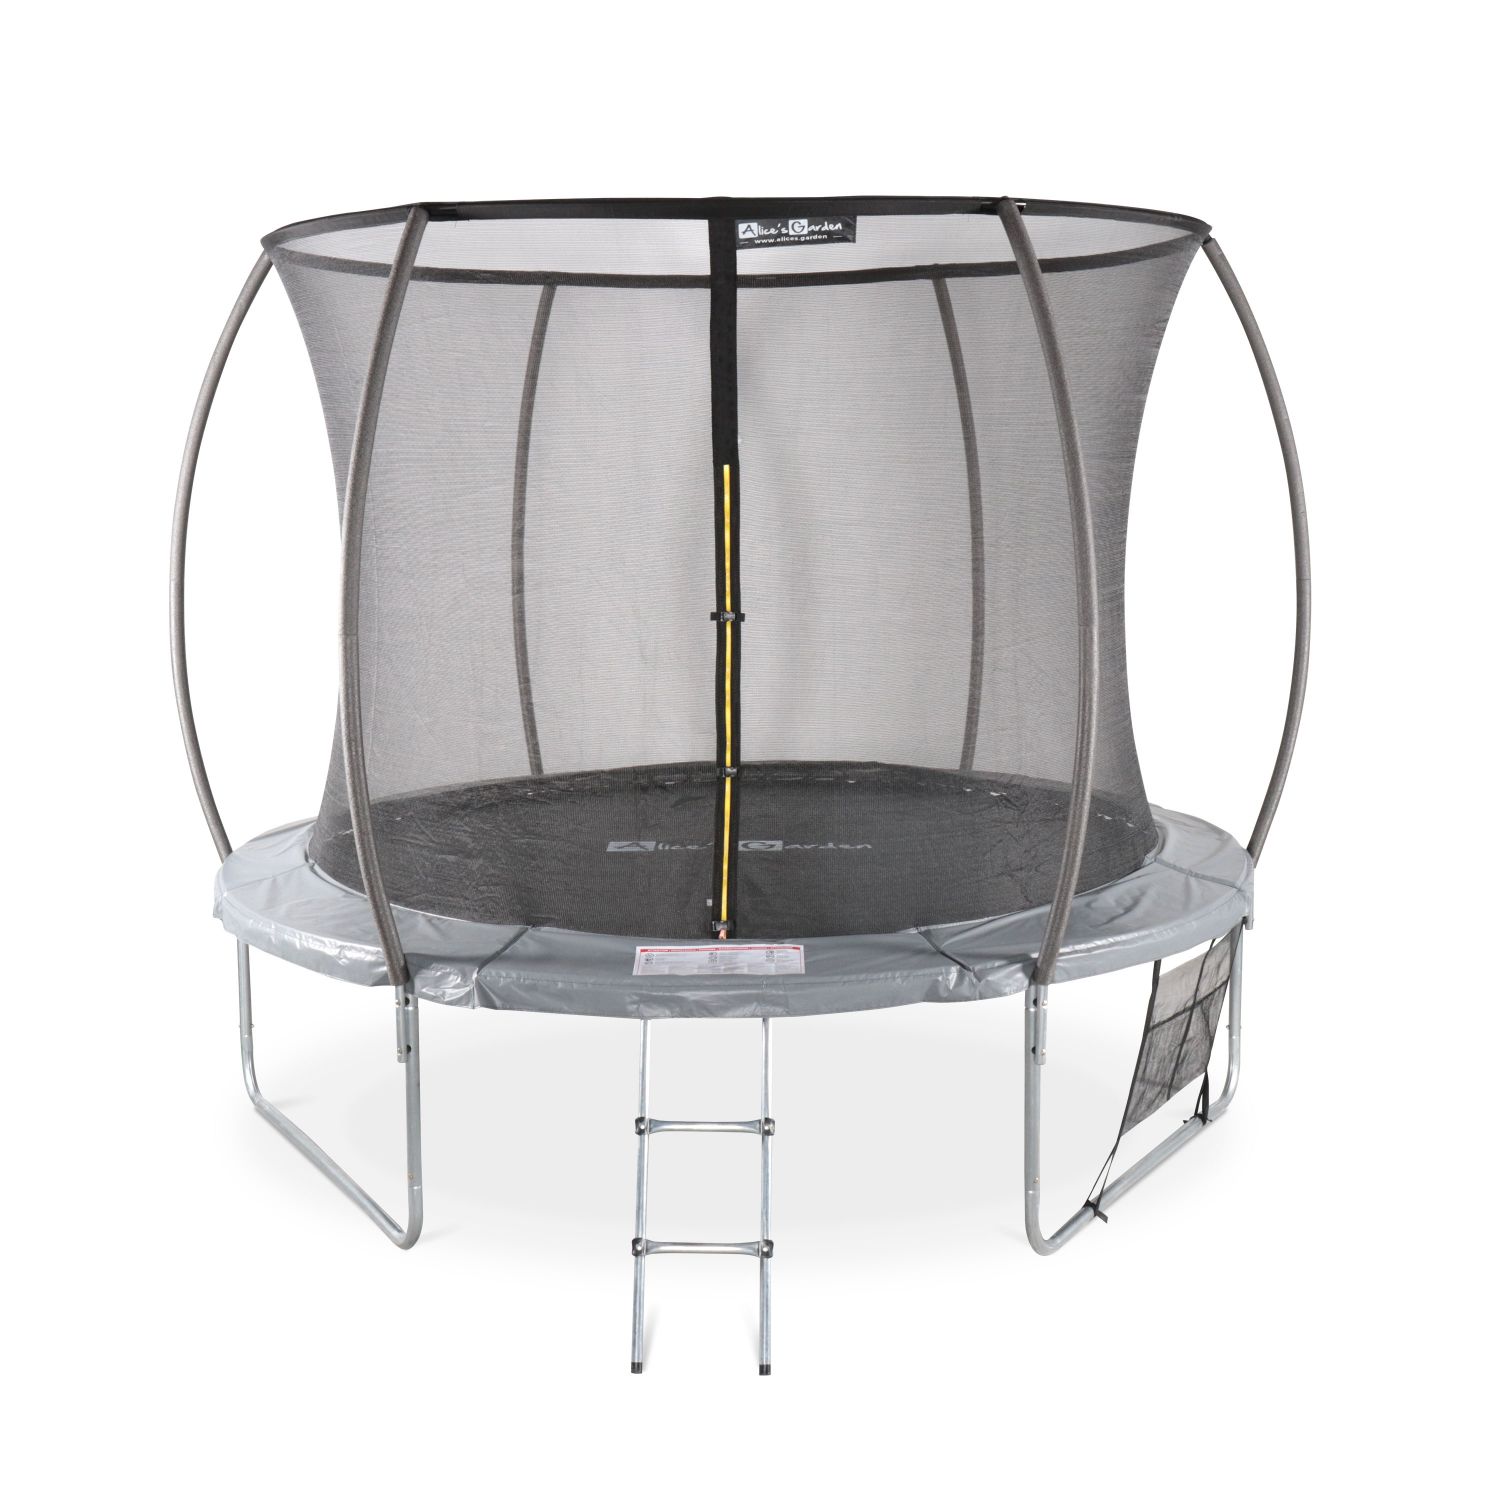 10FT TRAMPOLINE WITH ACCESSORIES KIT - MARS INNER